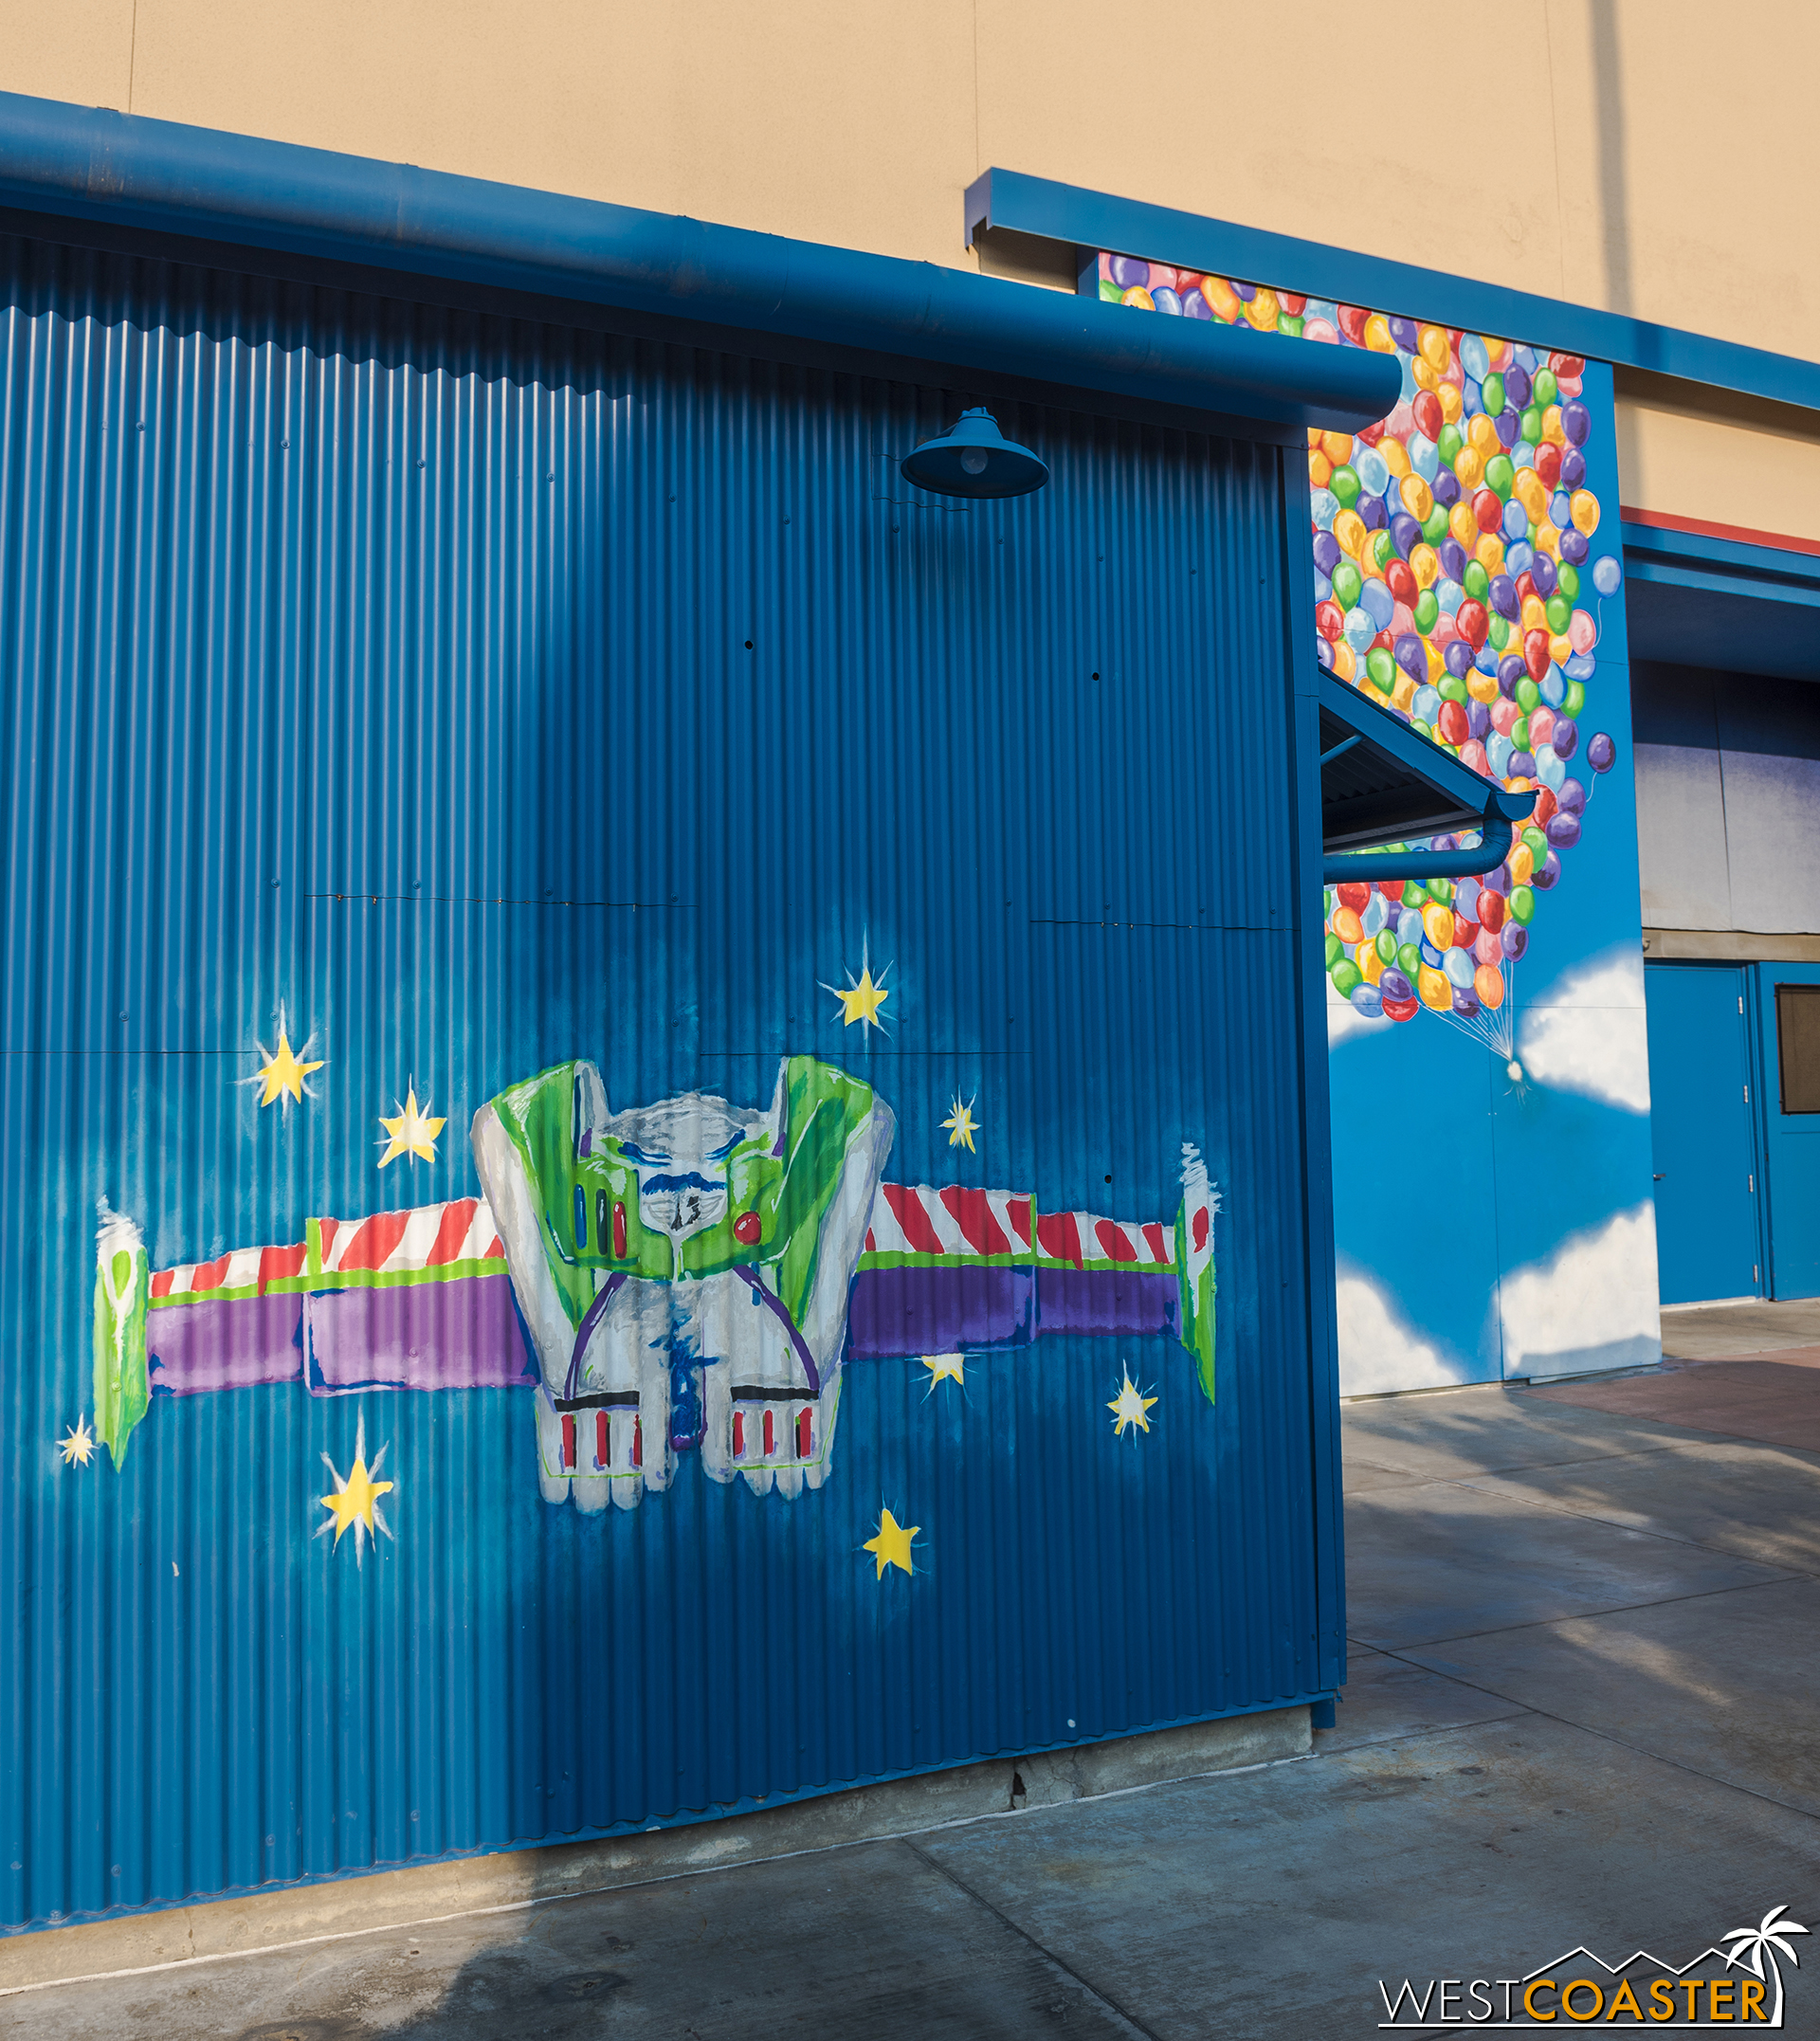  There are Instagram-friendly photo ops with fun Pixar murals for guests to pose with. 